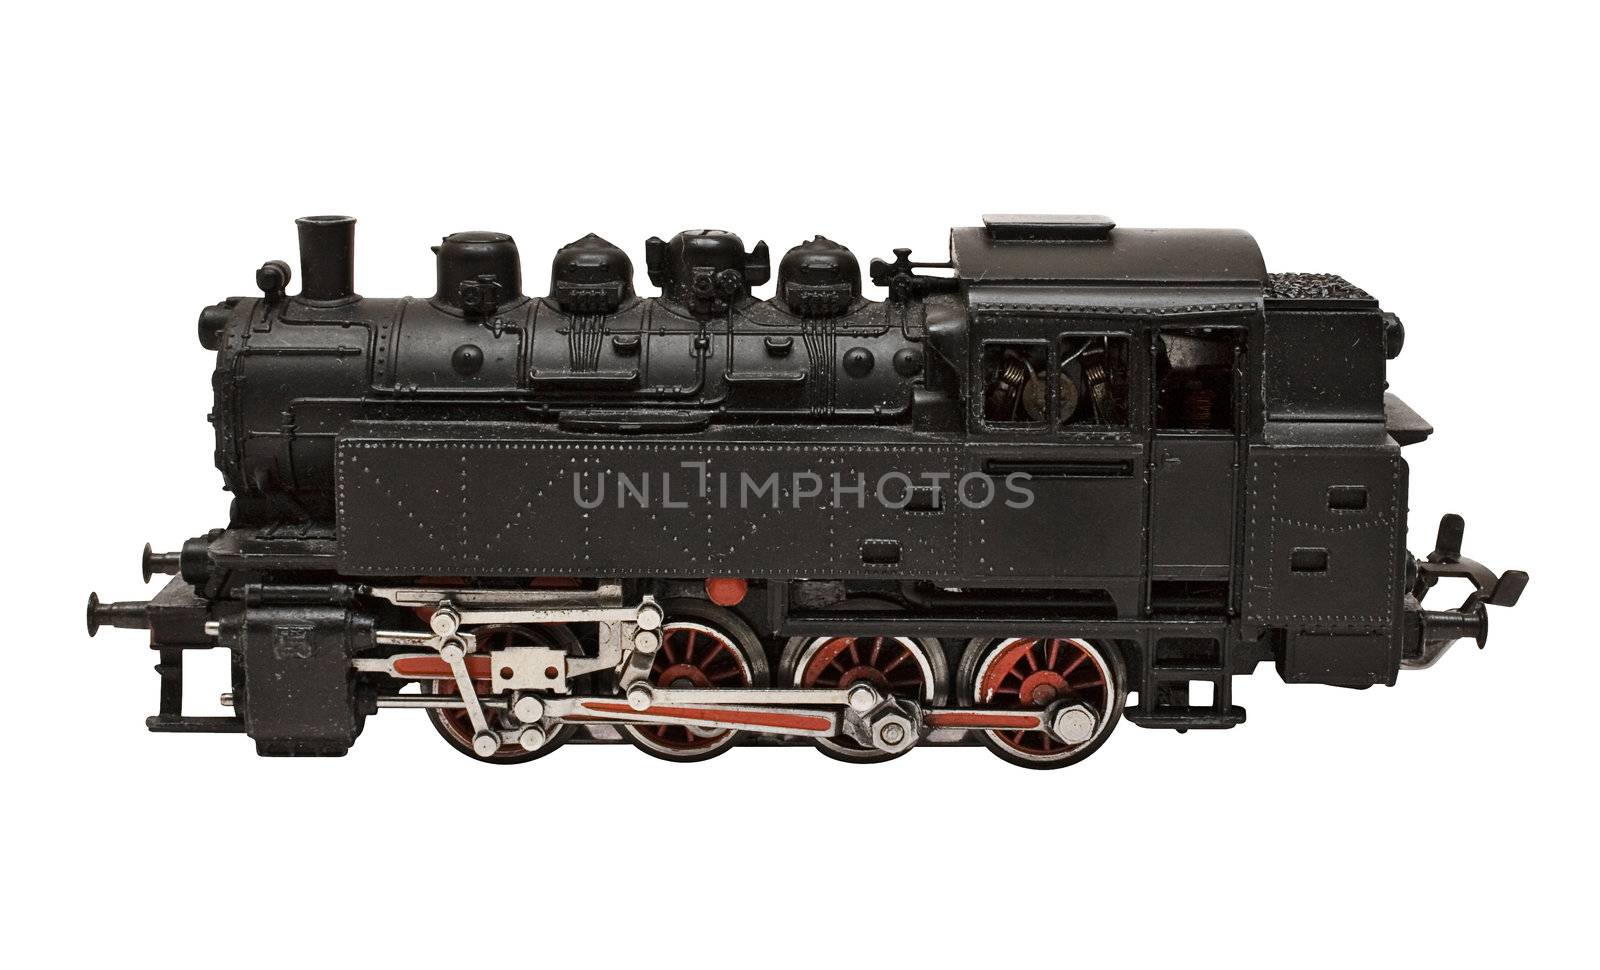 Locomotive Model Side View with Clipping Path by winterling